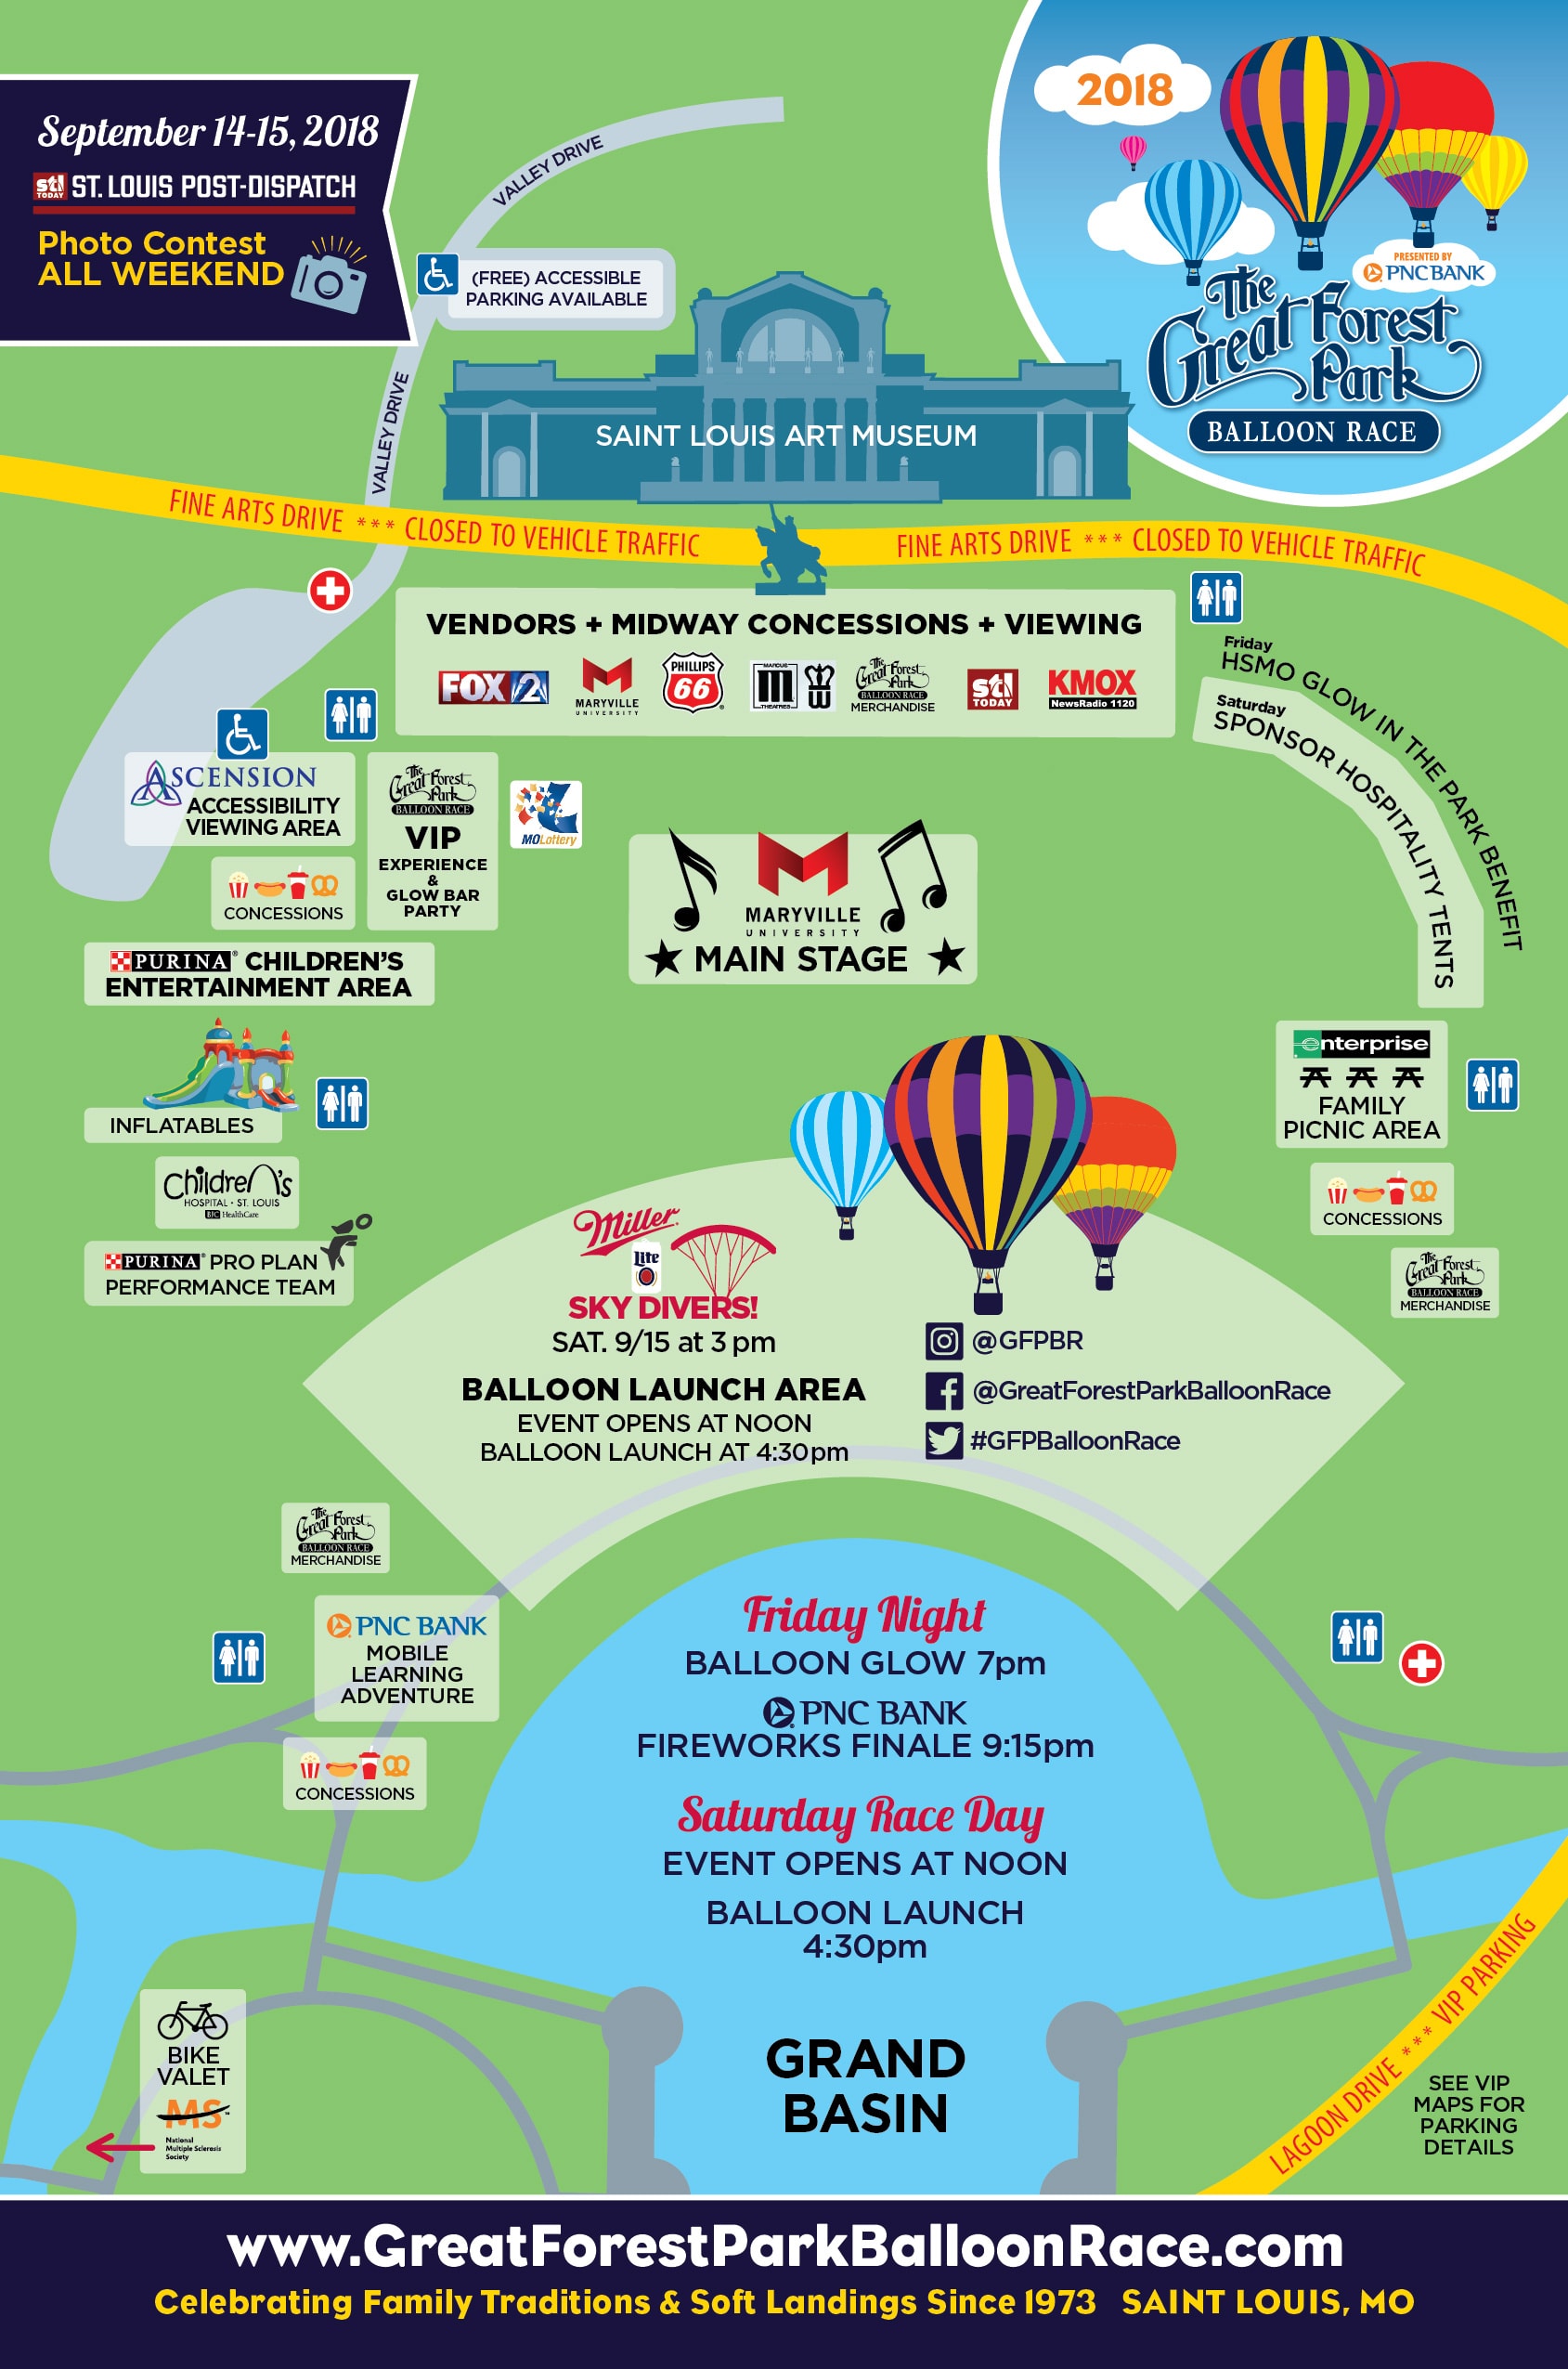 Maps, Parking, and Transportation | Great Forest Park Balloon Race | St Louis MO